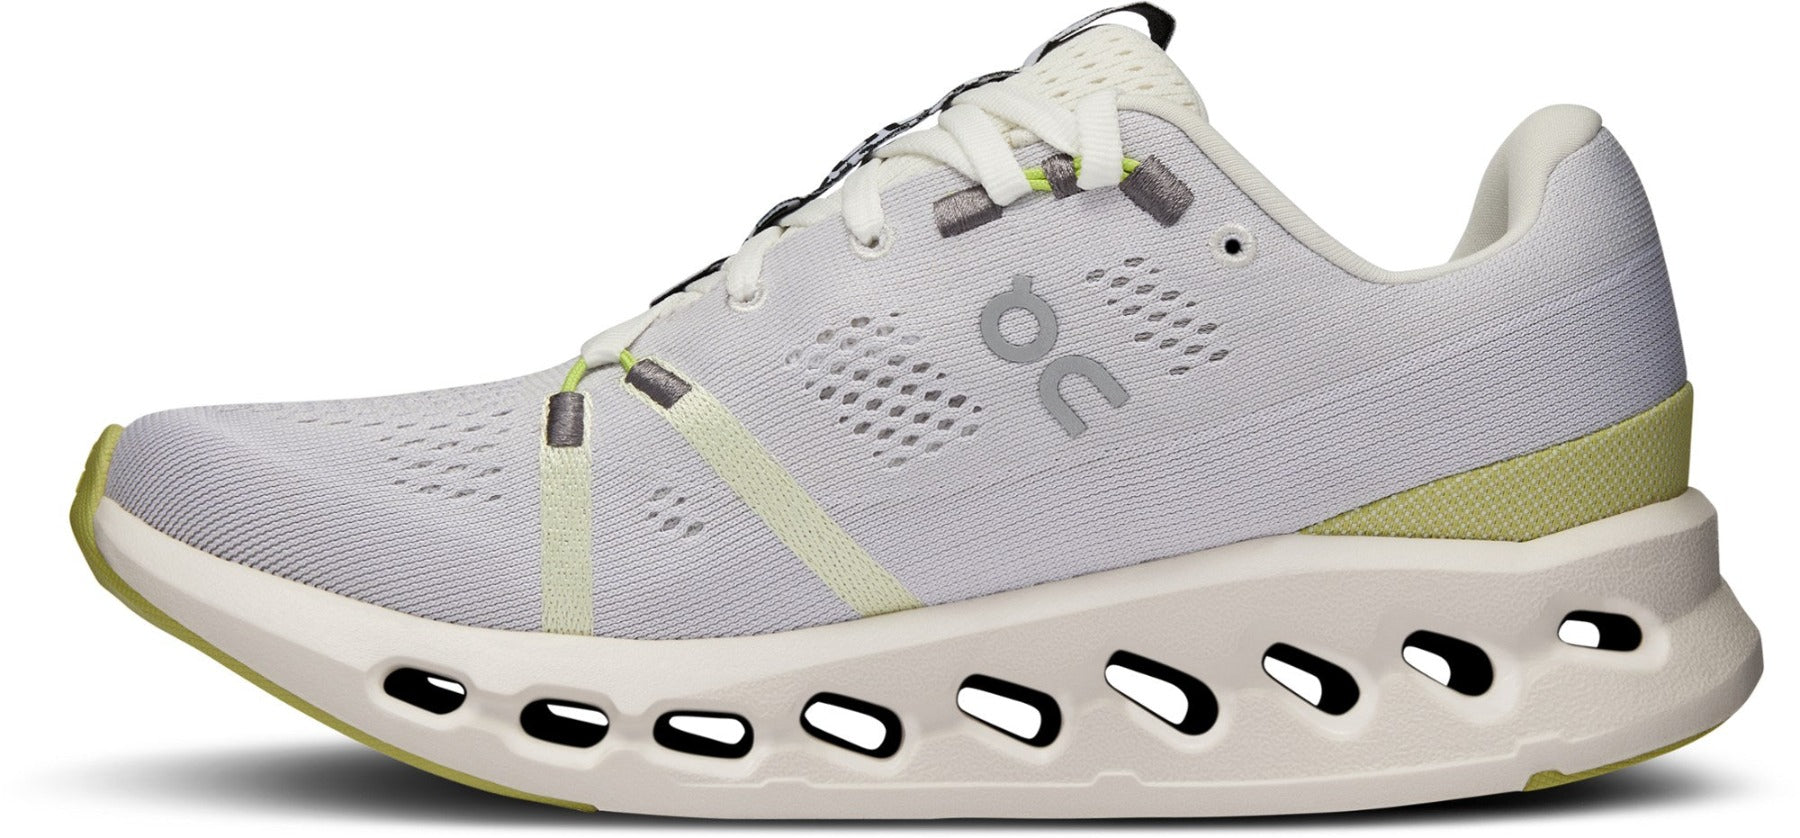 Medial view of the Women's Cloudsurfer by ON in the color White/Sand